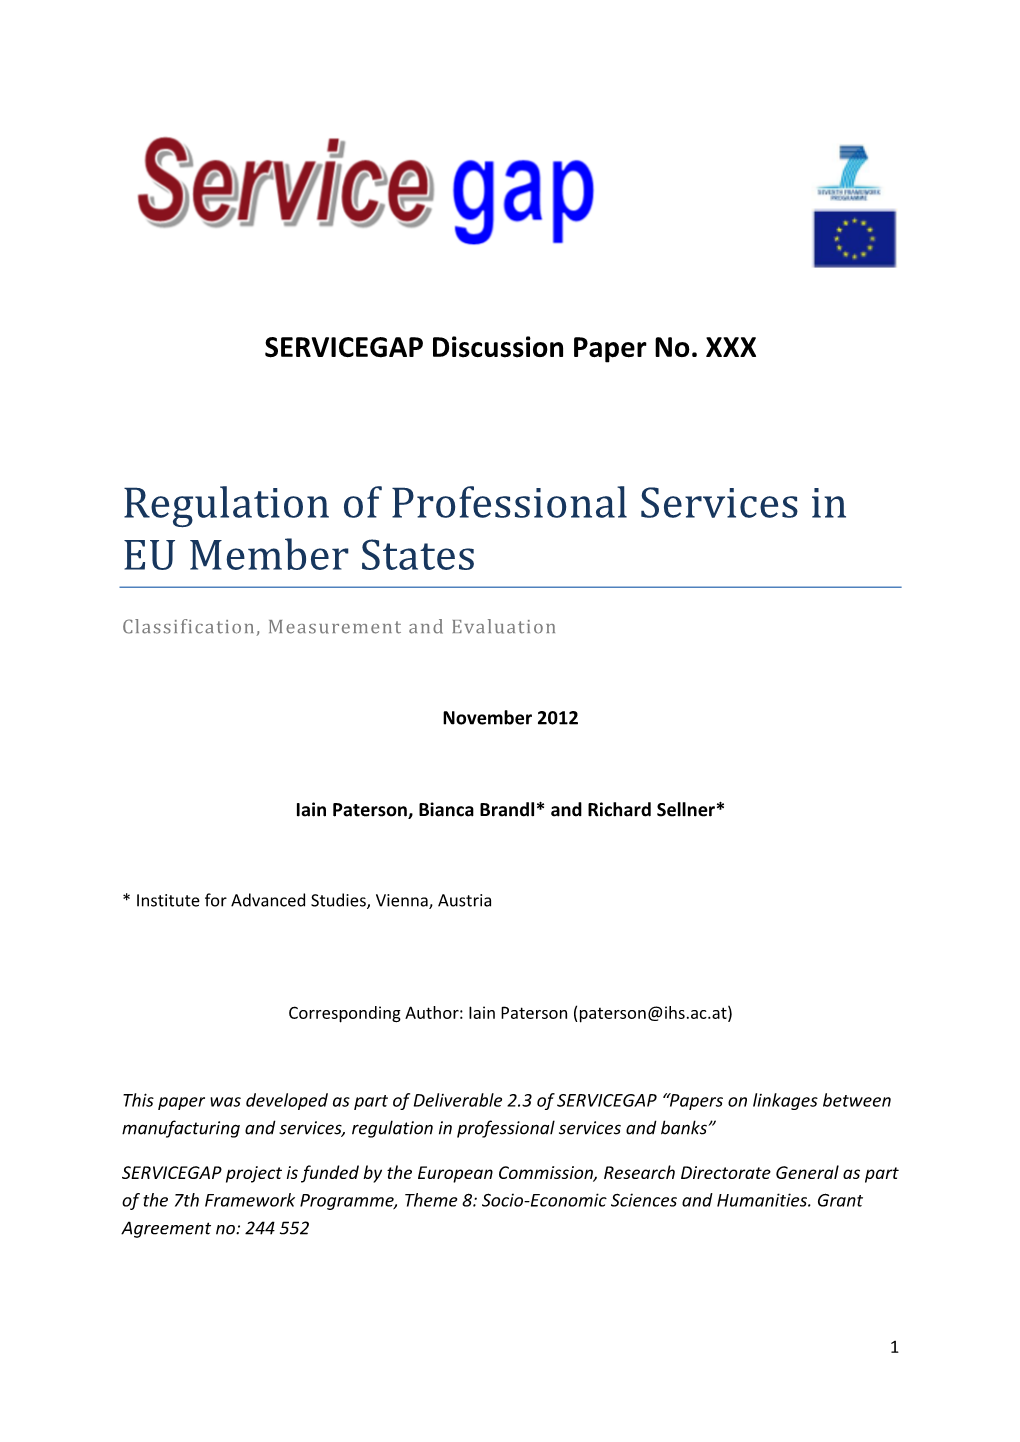 Regulation of Professional Services in EU Member States